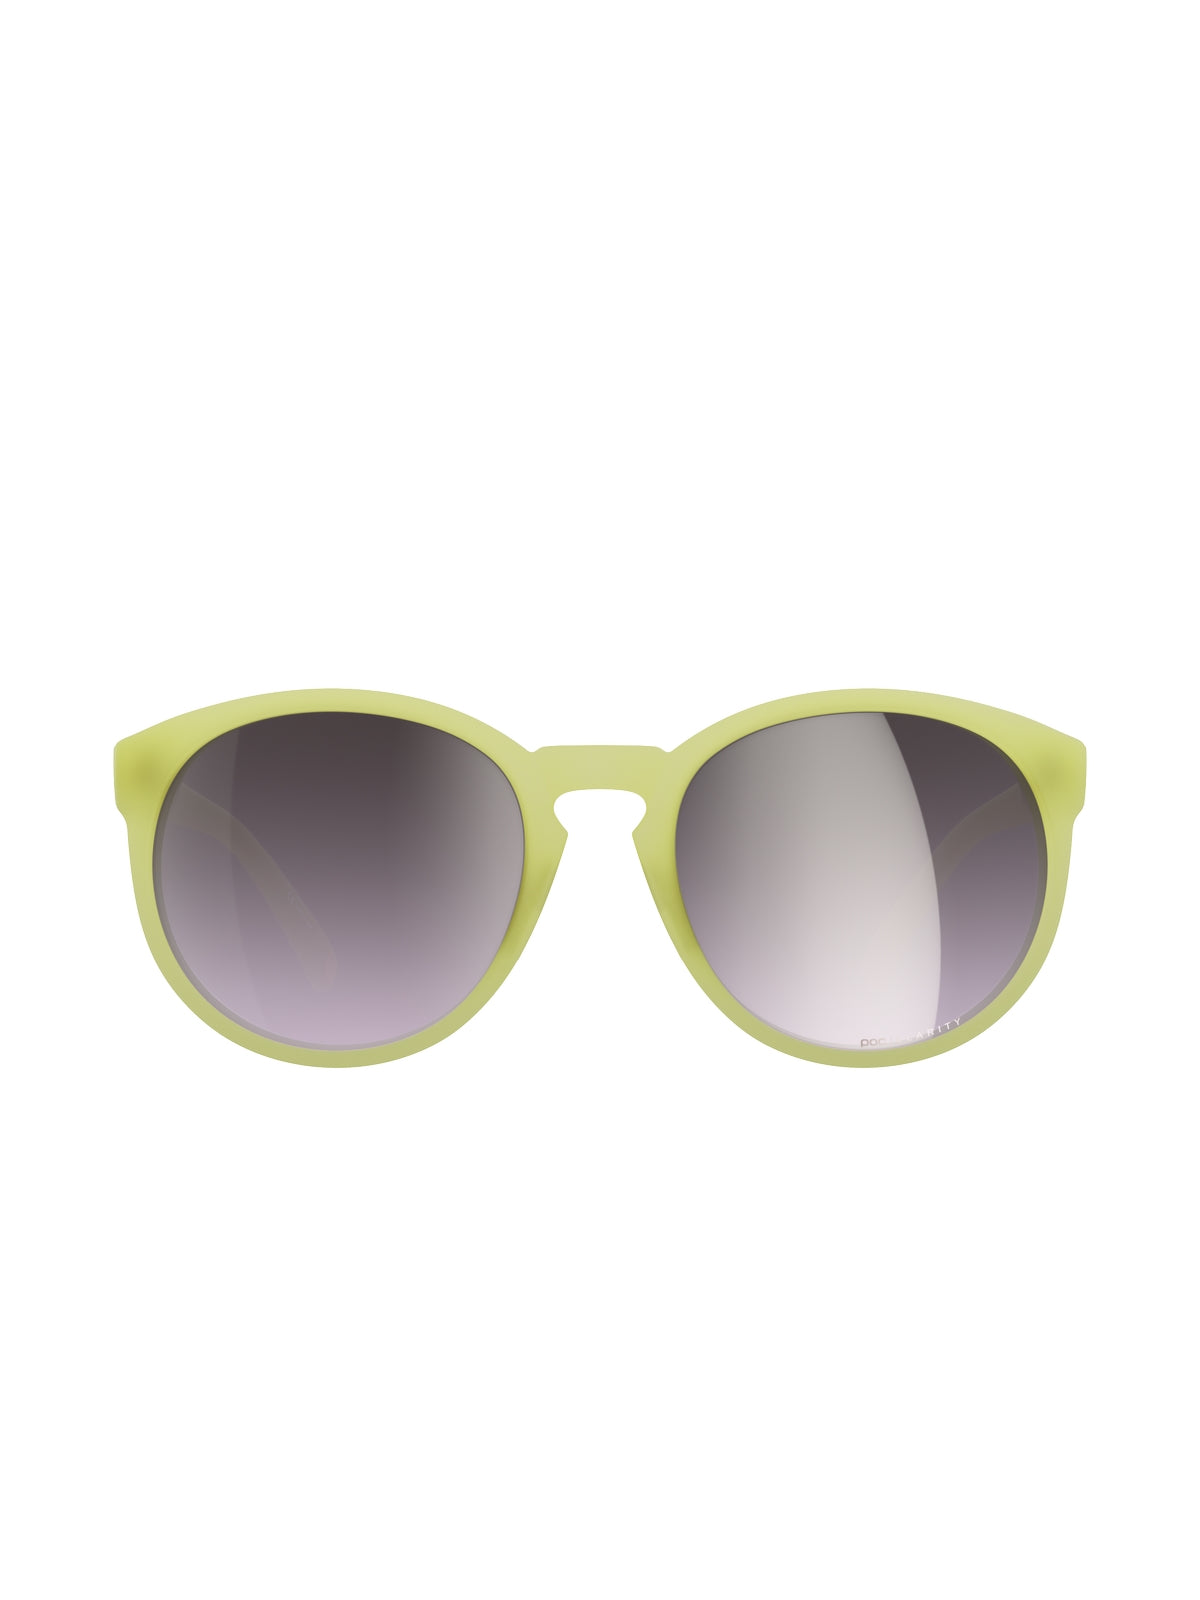 Okulary POC KNOW - Lemon Calcite Translucent - Clarity ROAD | Brown/Silver Mirror Cat 3